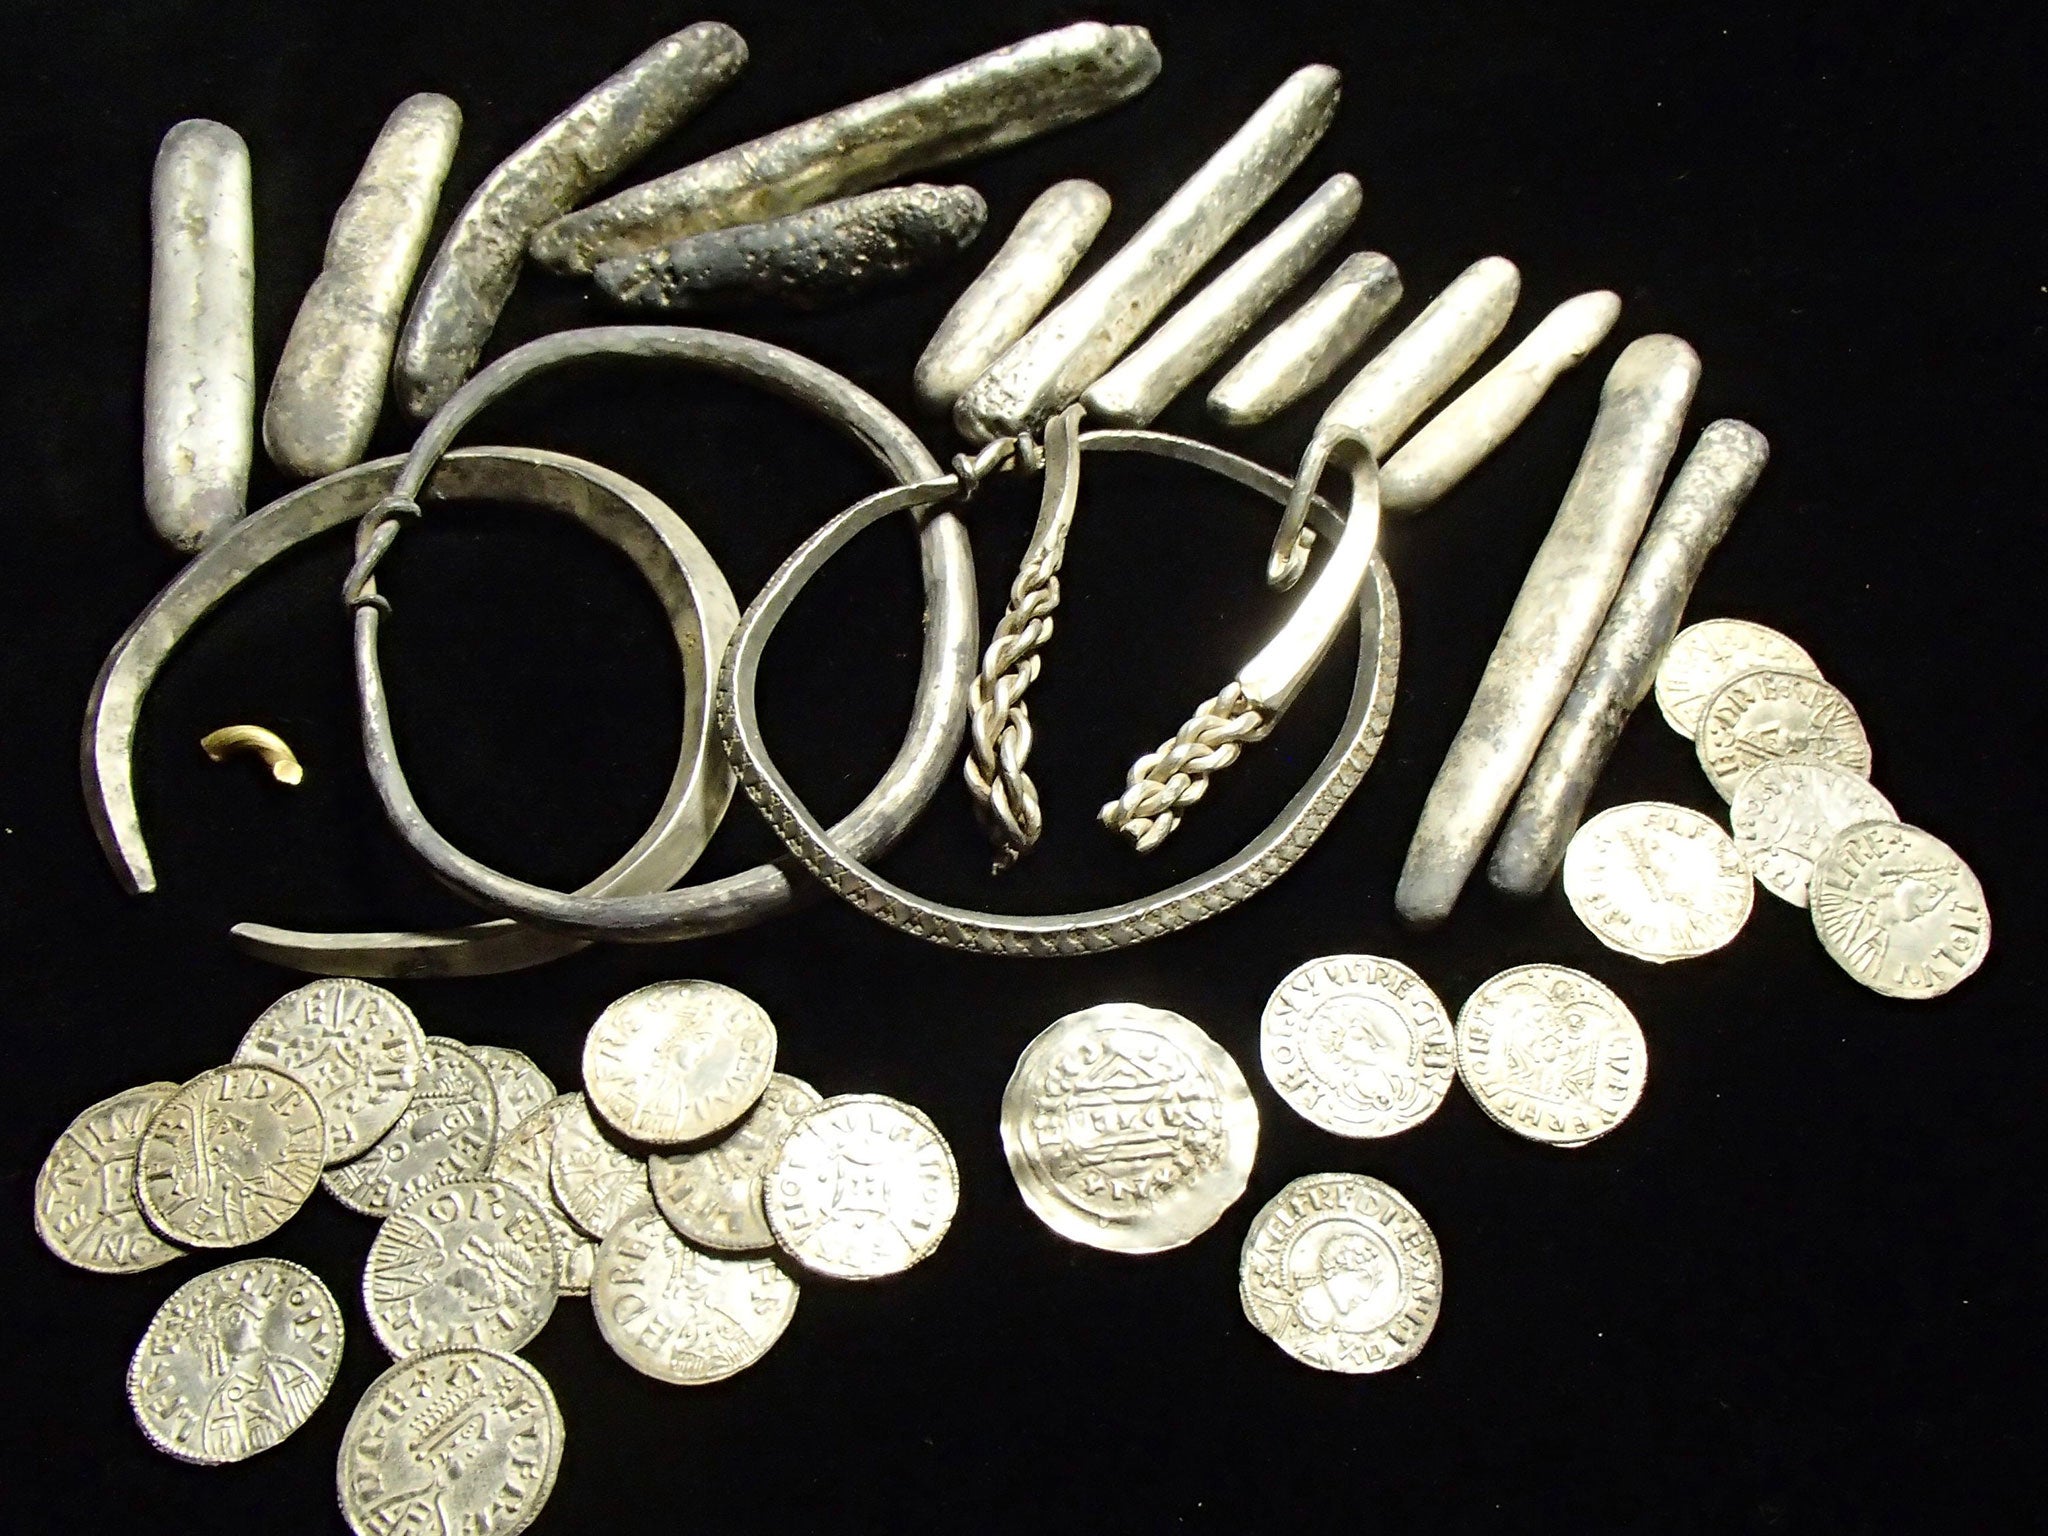 Dozens of rare coins, Viking arm rings and silver inglots were among a "nationally significant" hoard discovered in Oxfordshire